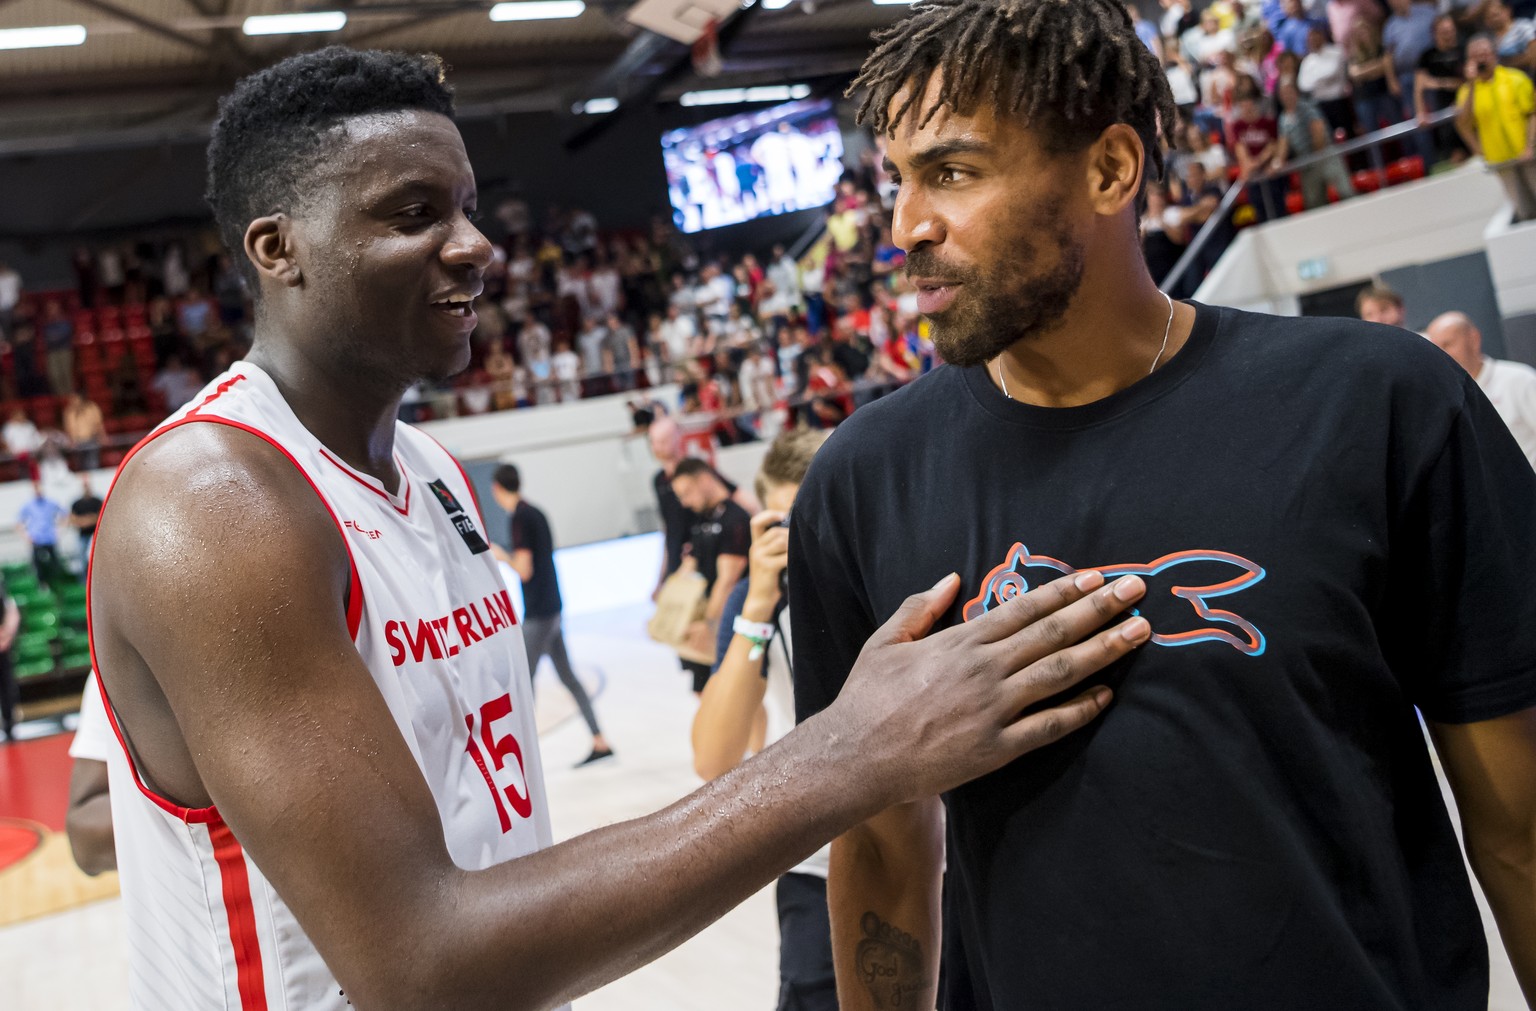 Switzerland&#039;s Clint Capela, left, reacts next to Switzerland&#039;s Thabo Sefolosha, right, during the FIBA Eurobasket 2021 pre-qualifiers match between Switzerland and Iceland in Montreux, Switz ...